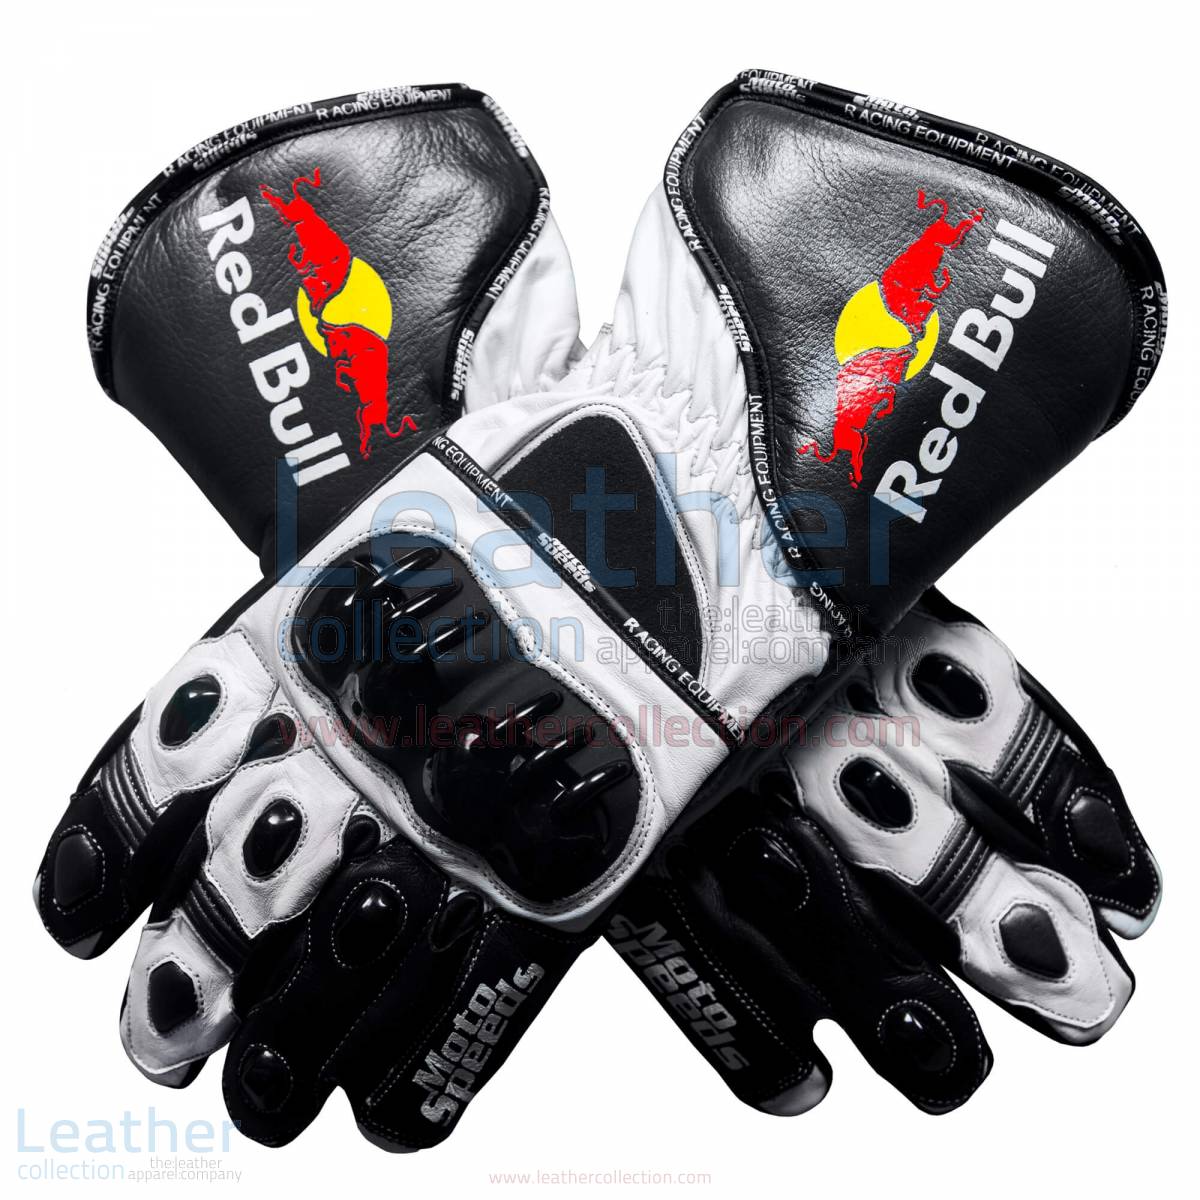 Red Bull Motorcycle Racing Gloves –  Gloves